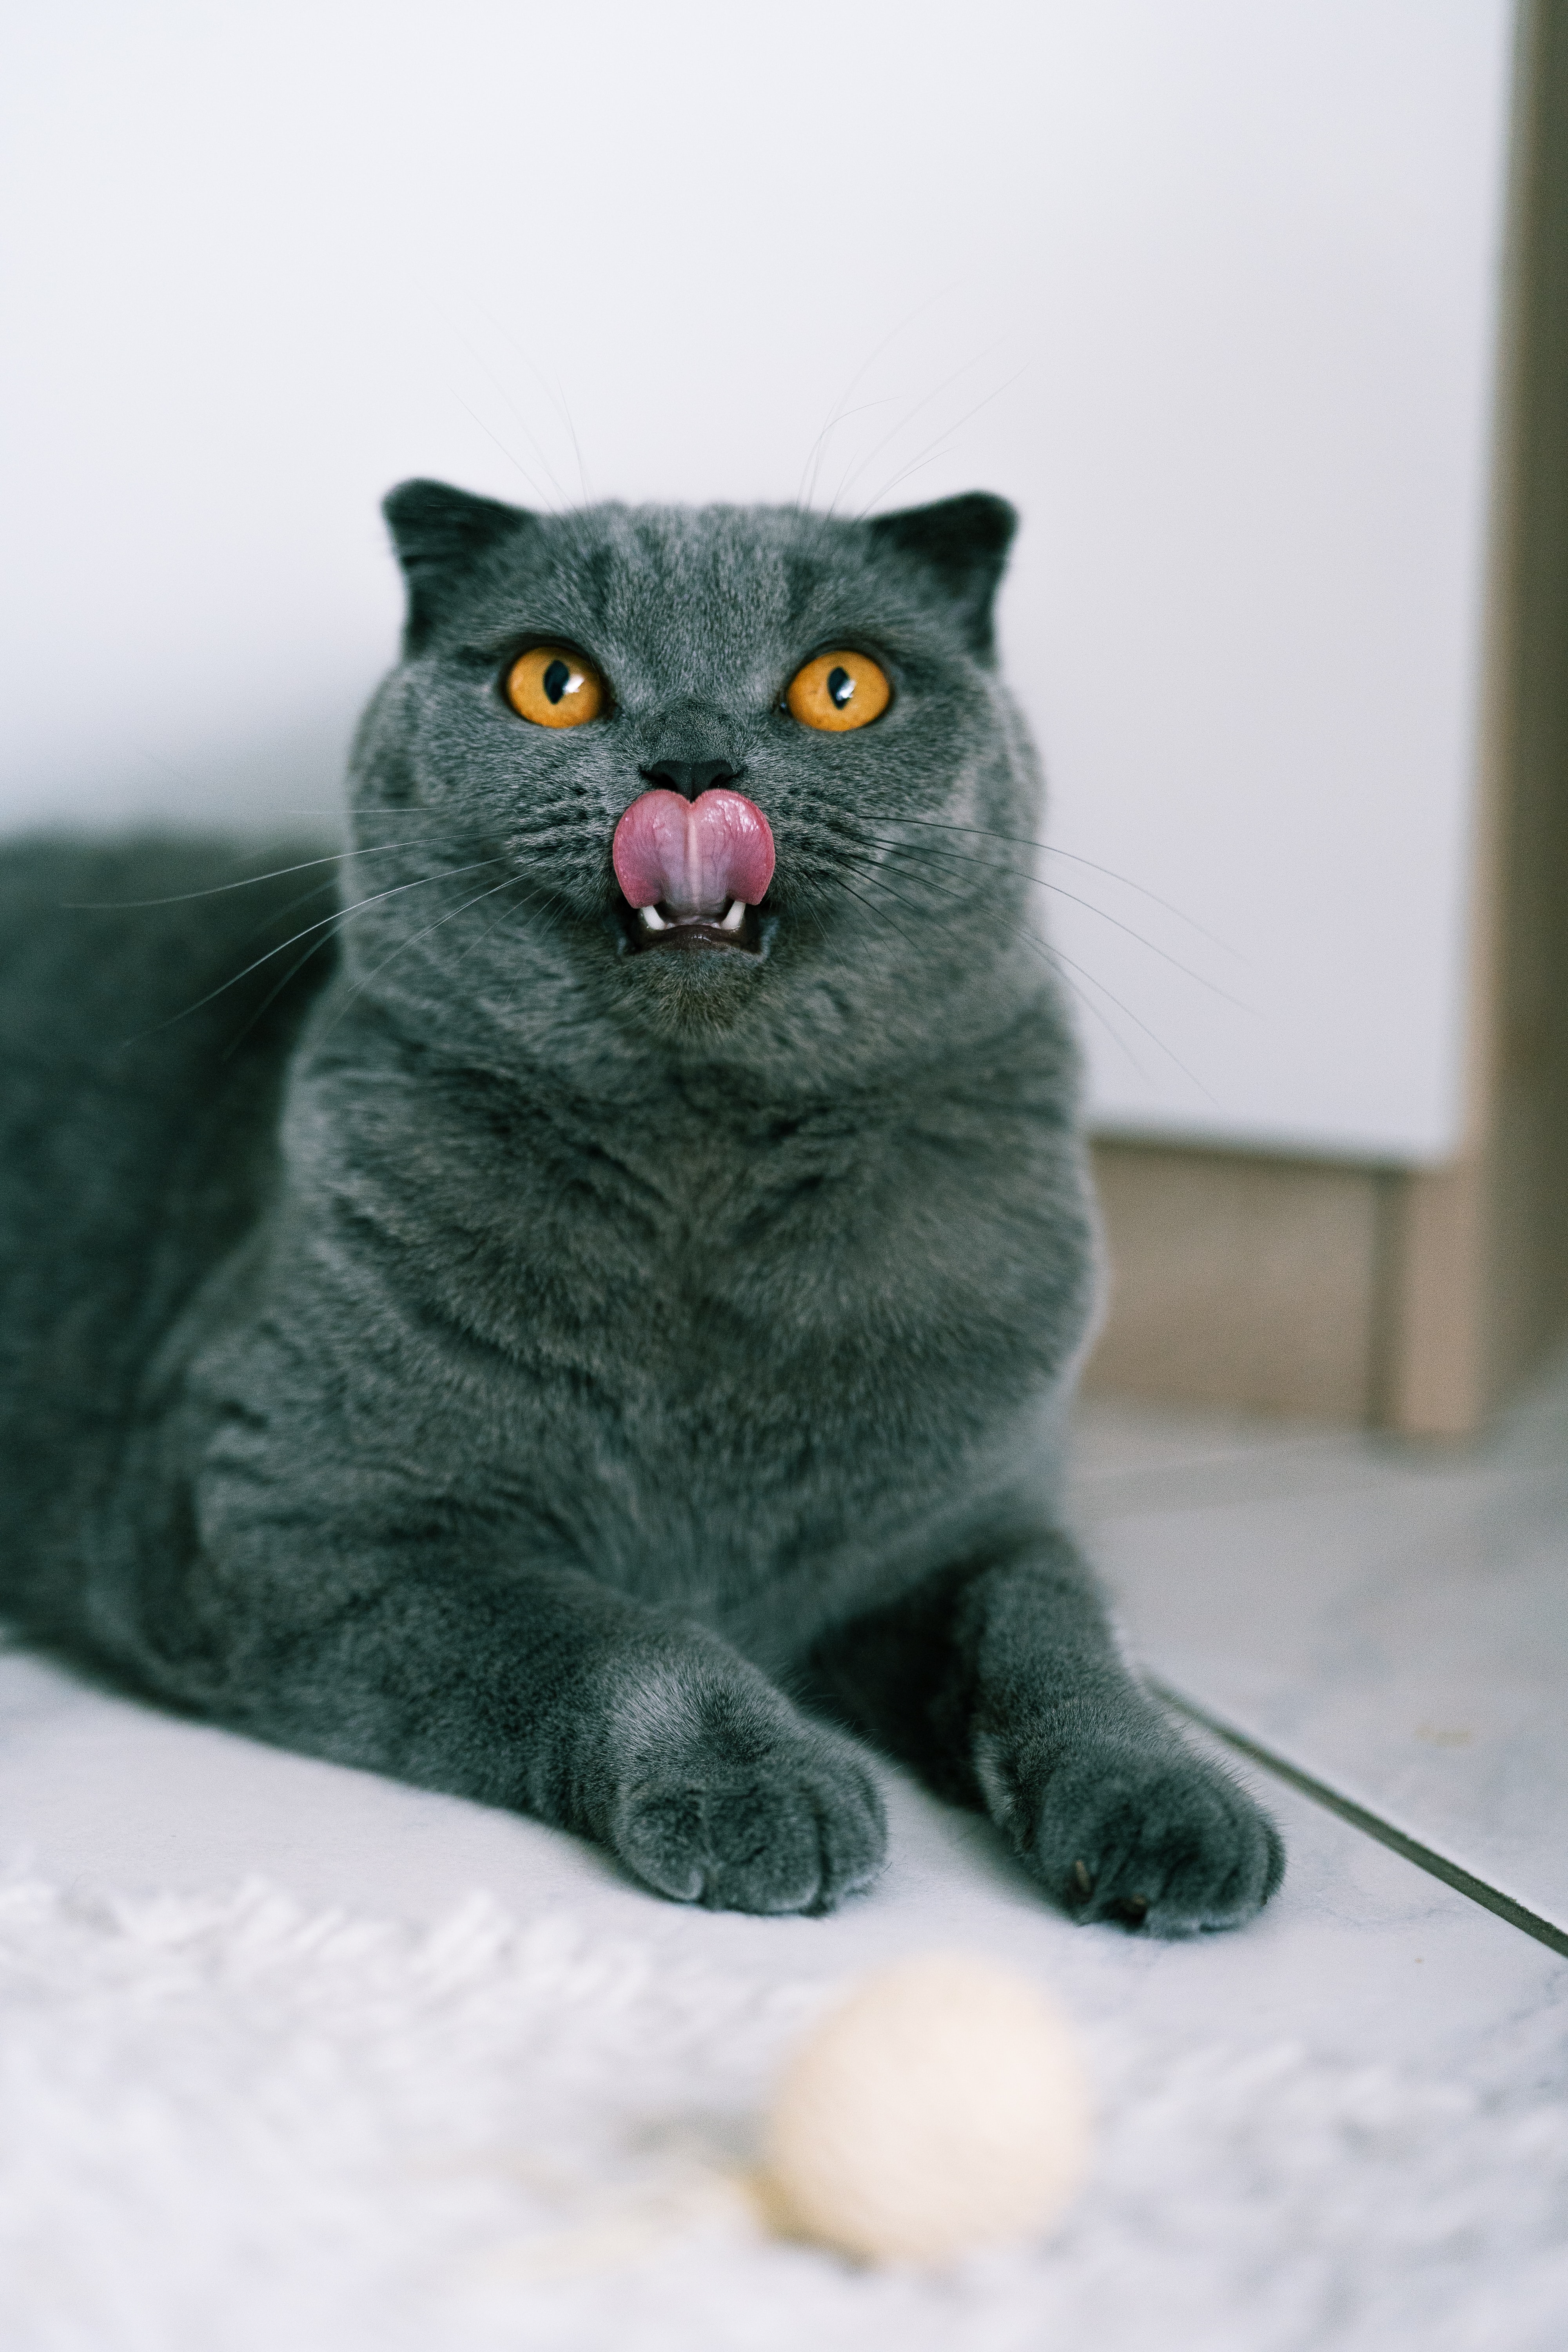 tongue stuck out, animals, cat, pet, sight, opinion, protruding tongue, british cat for android